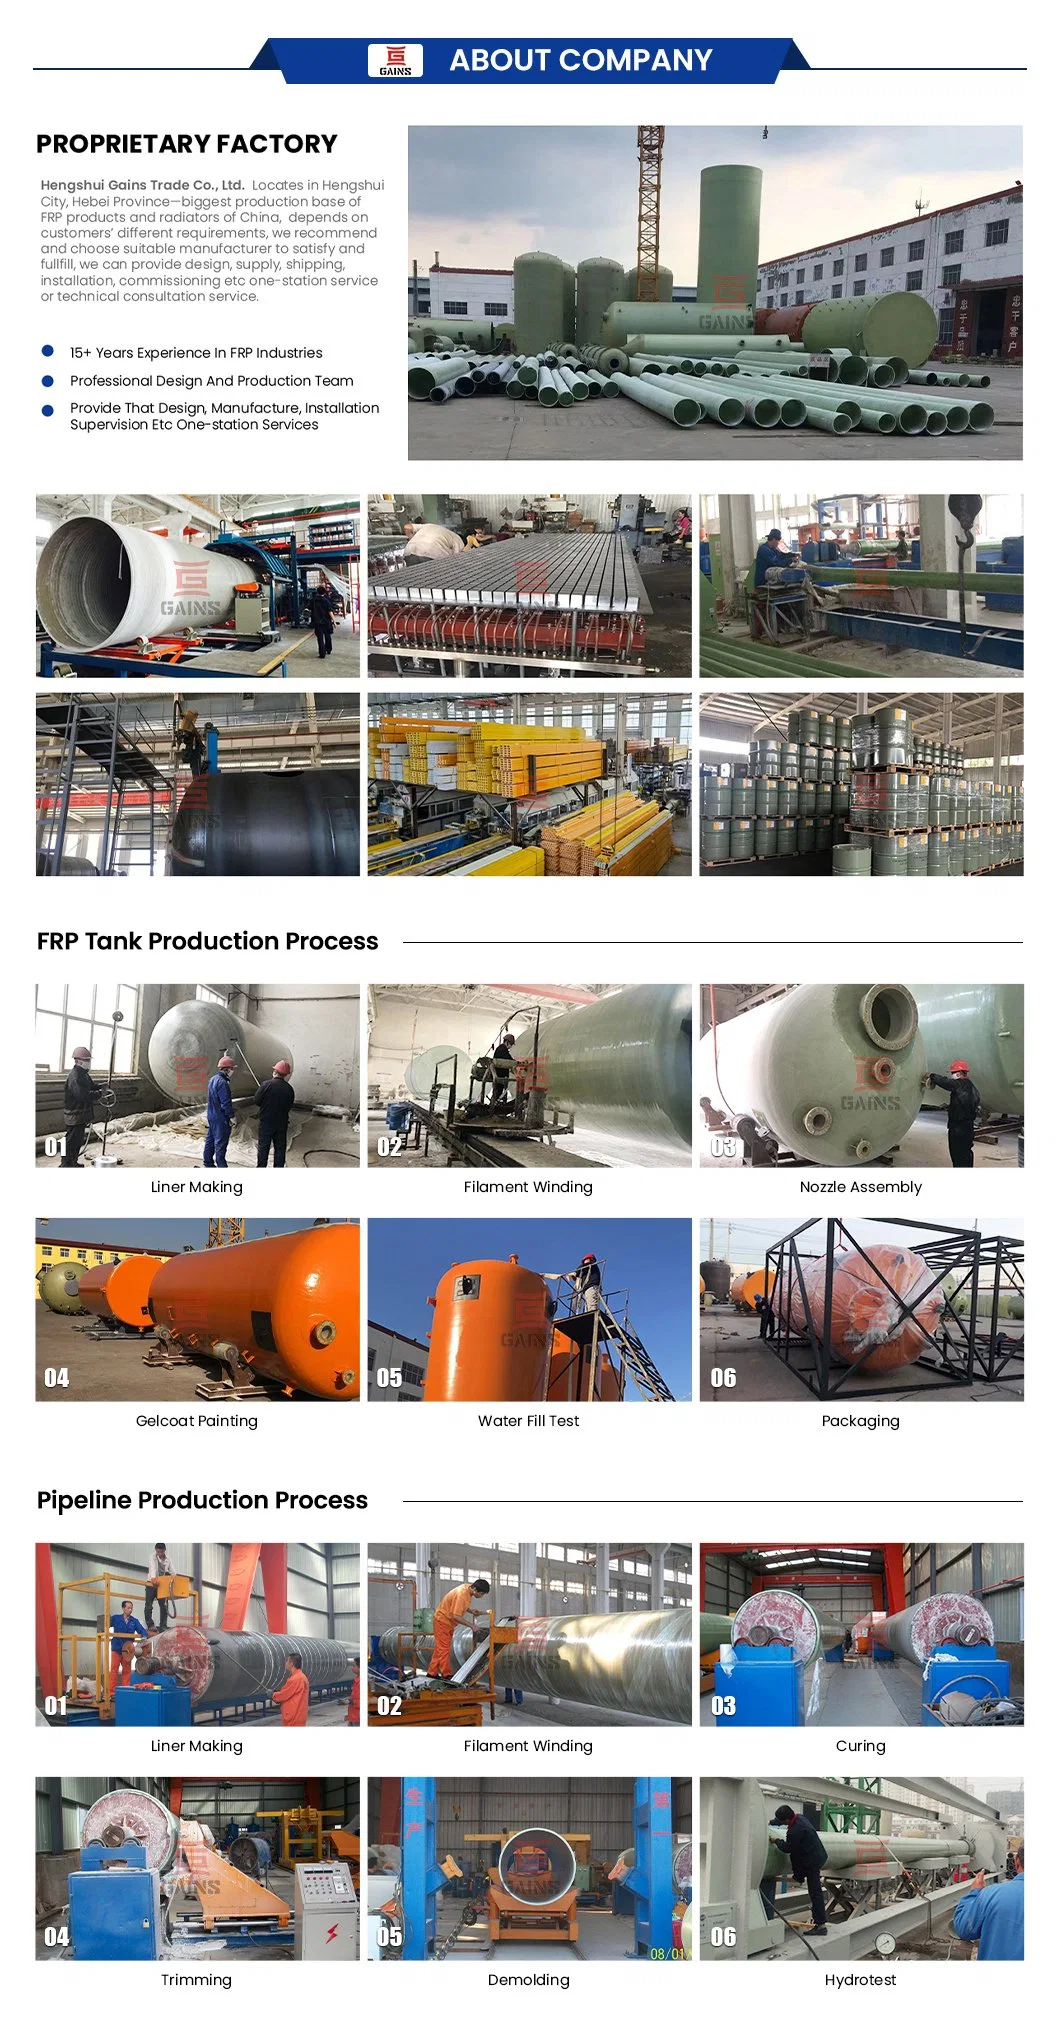 Gains FRP Large Winding Storage Tank Manufacturing China Filament Winding Vertical-Setting FRP Chemical Tanks